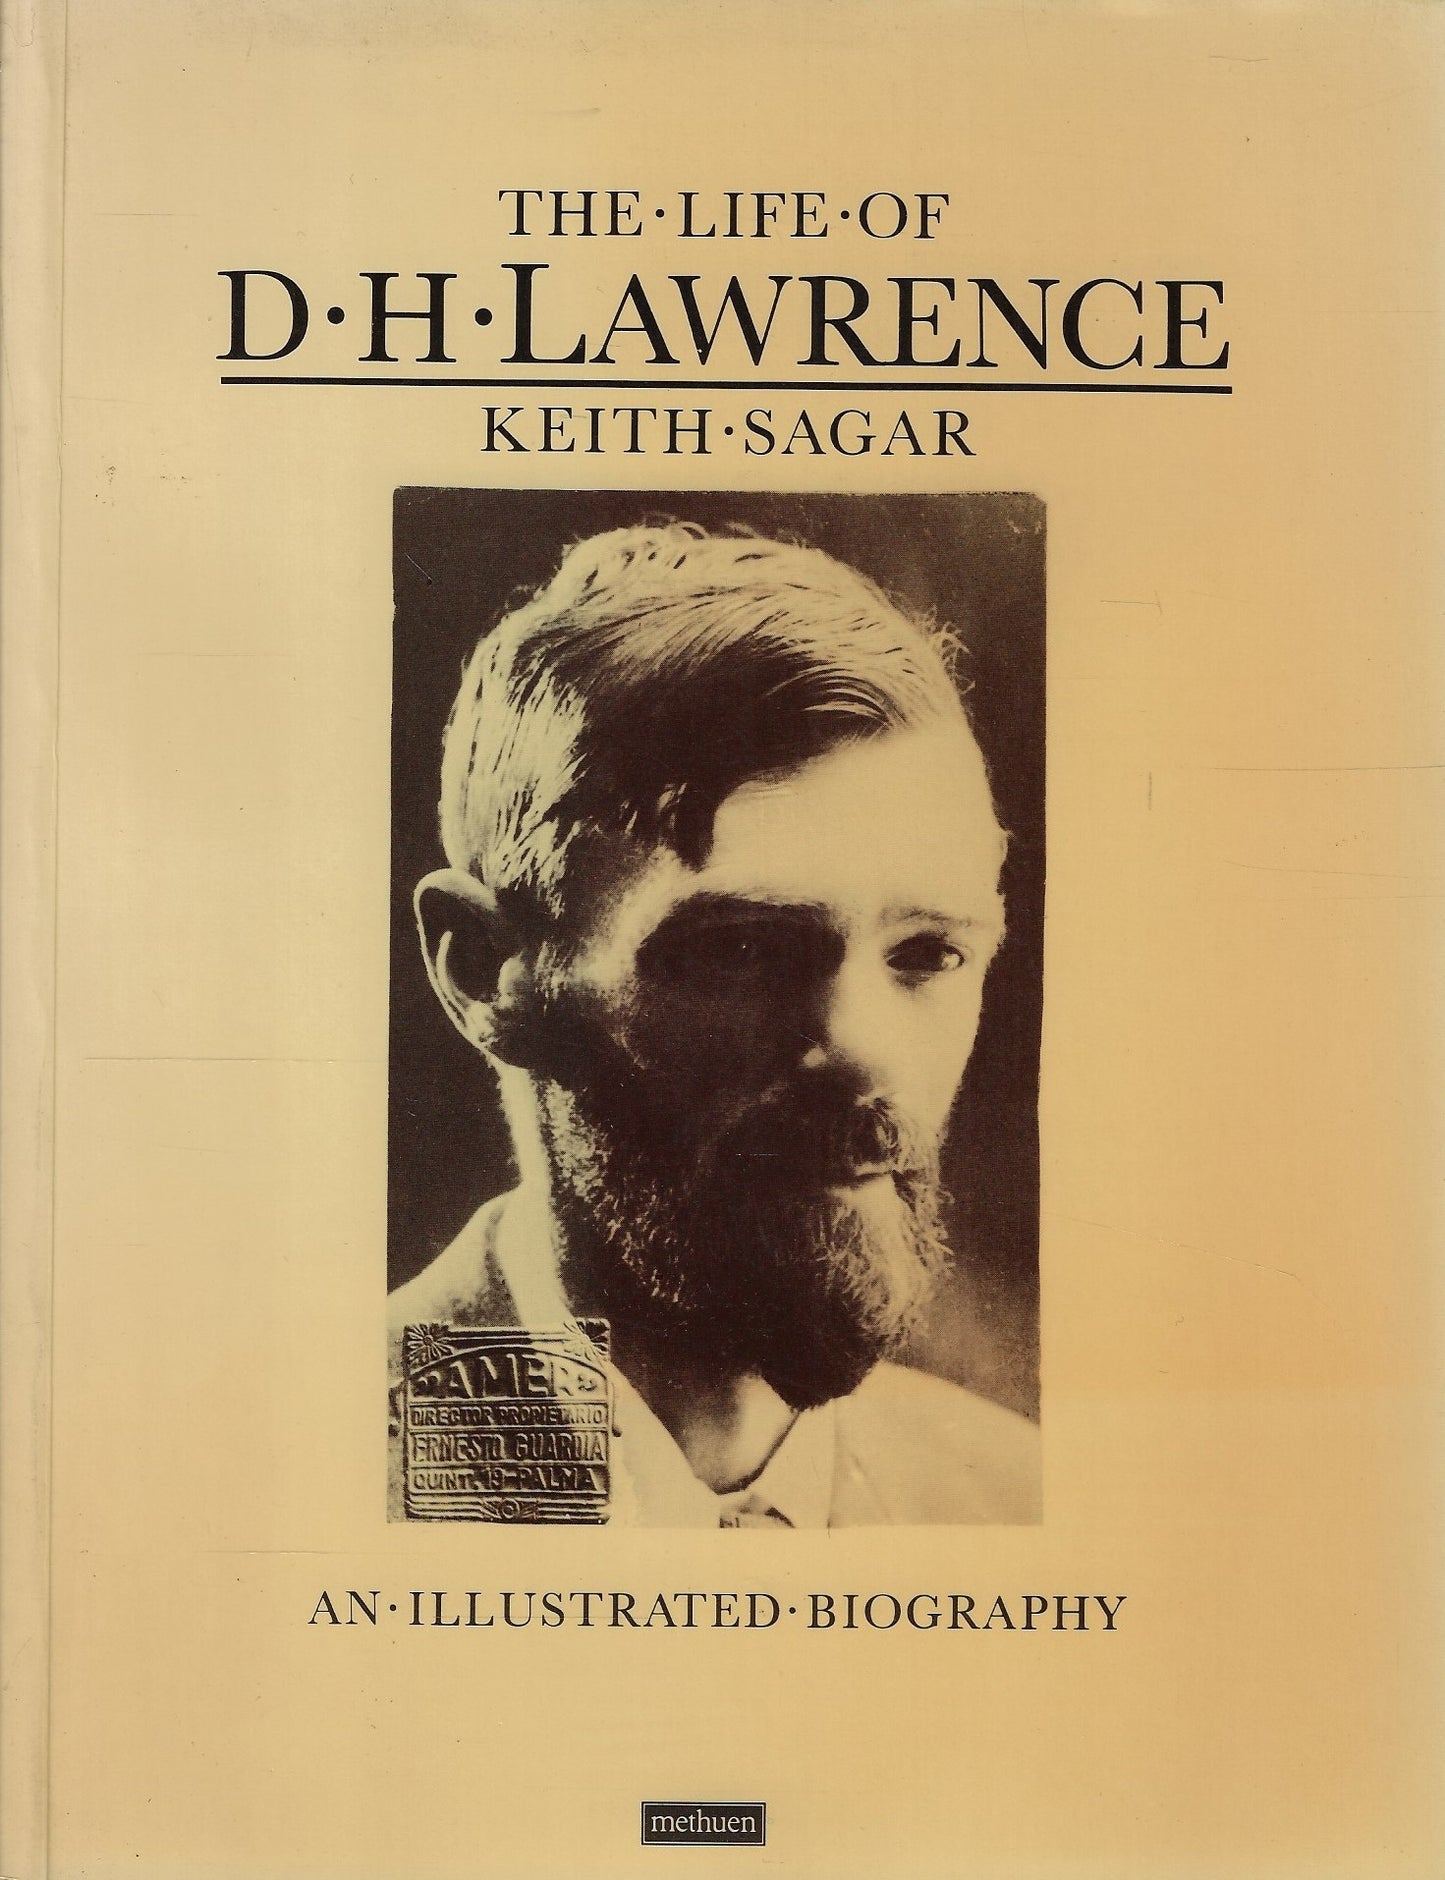 The life of D.H. Lawrence